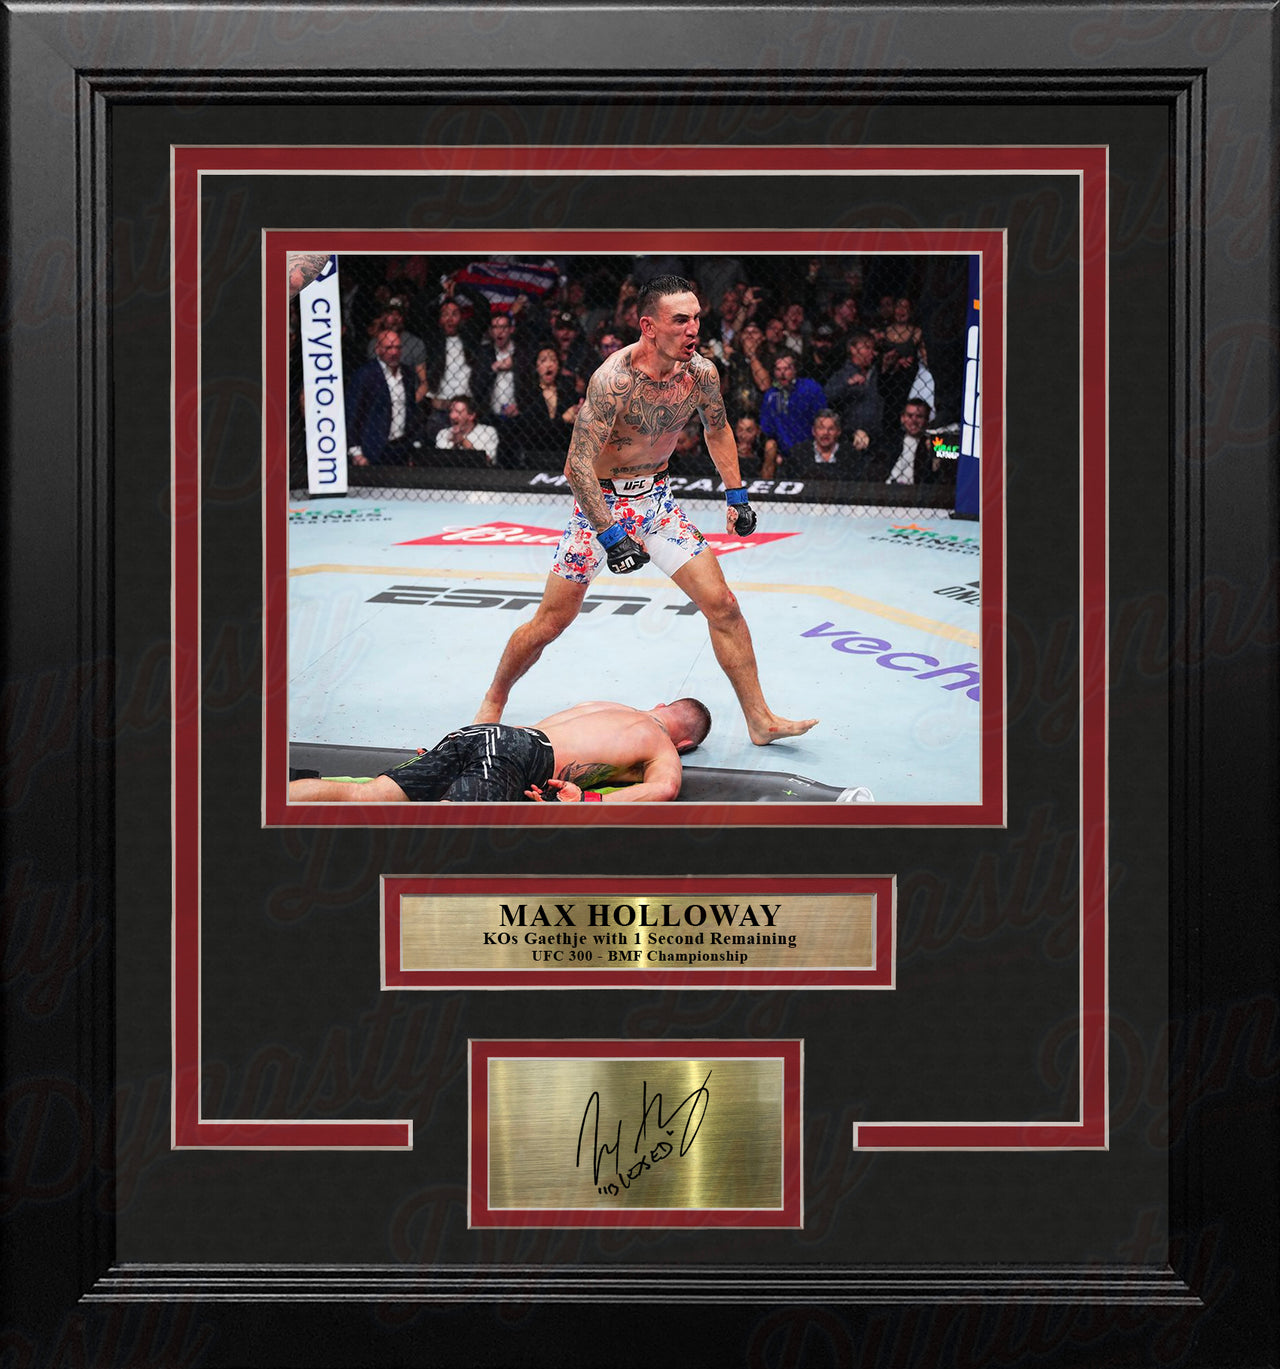 Max Holloway KOs Gaethje 8x10 Framed Mixed Martial Arts Photo with Engraved Autograph